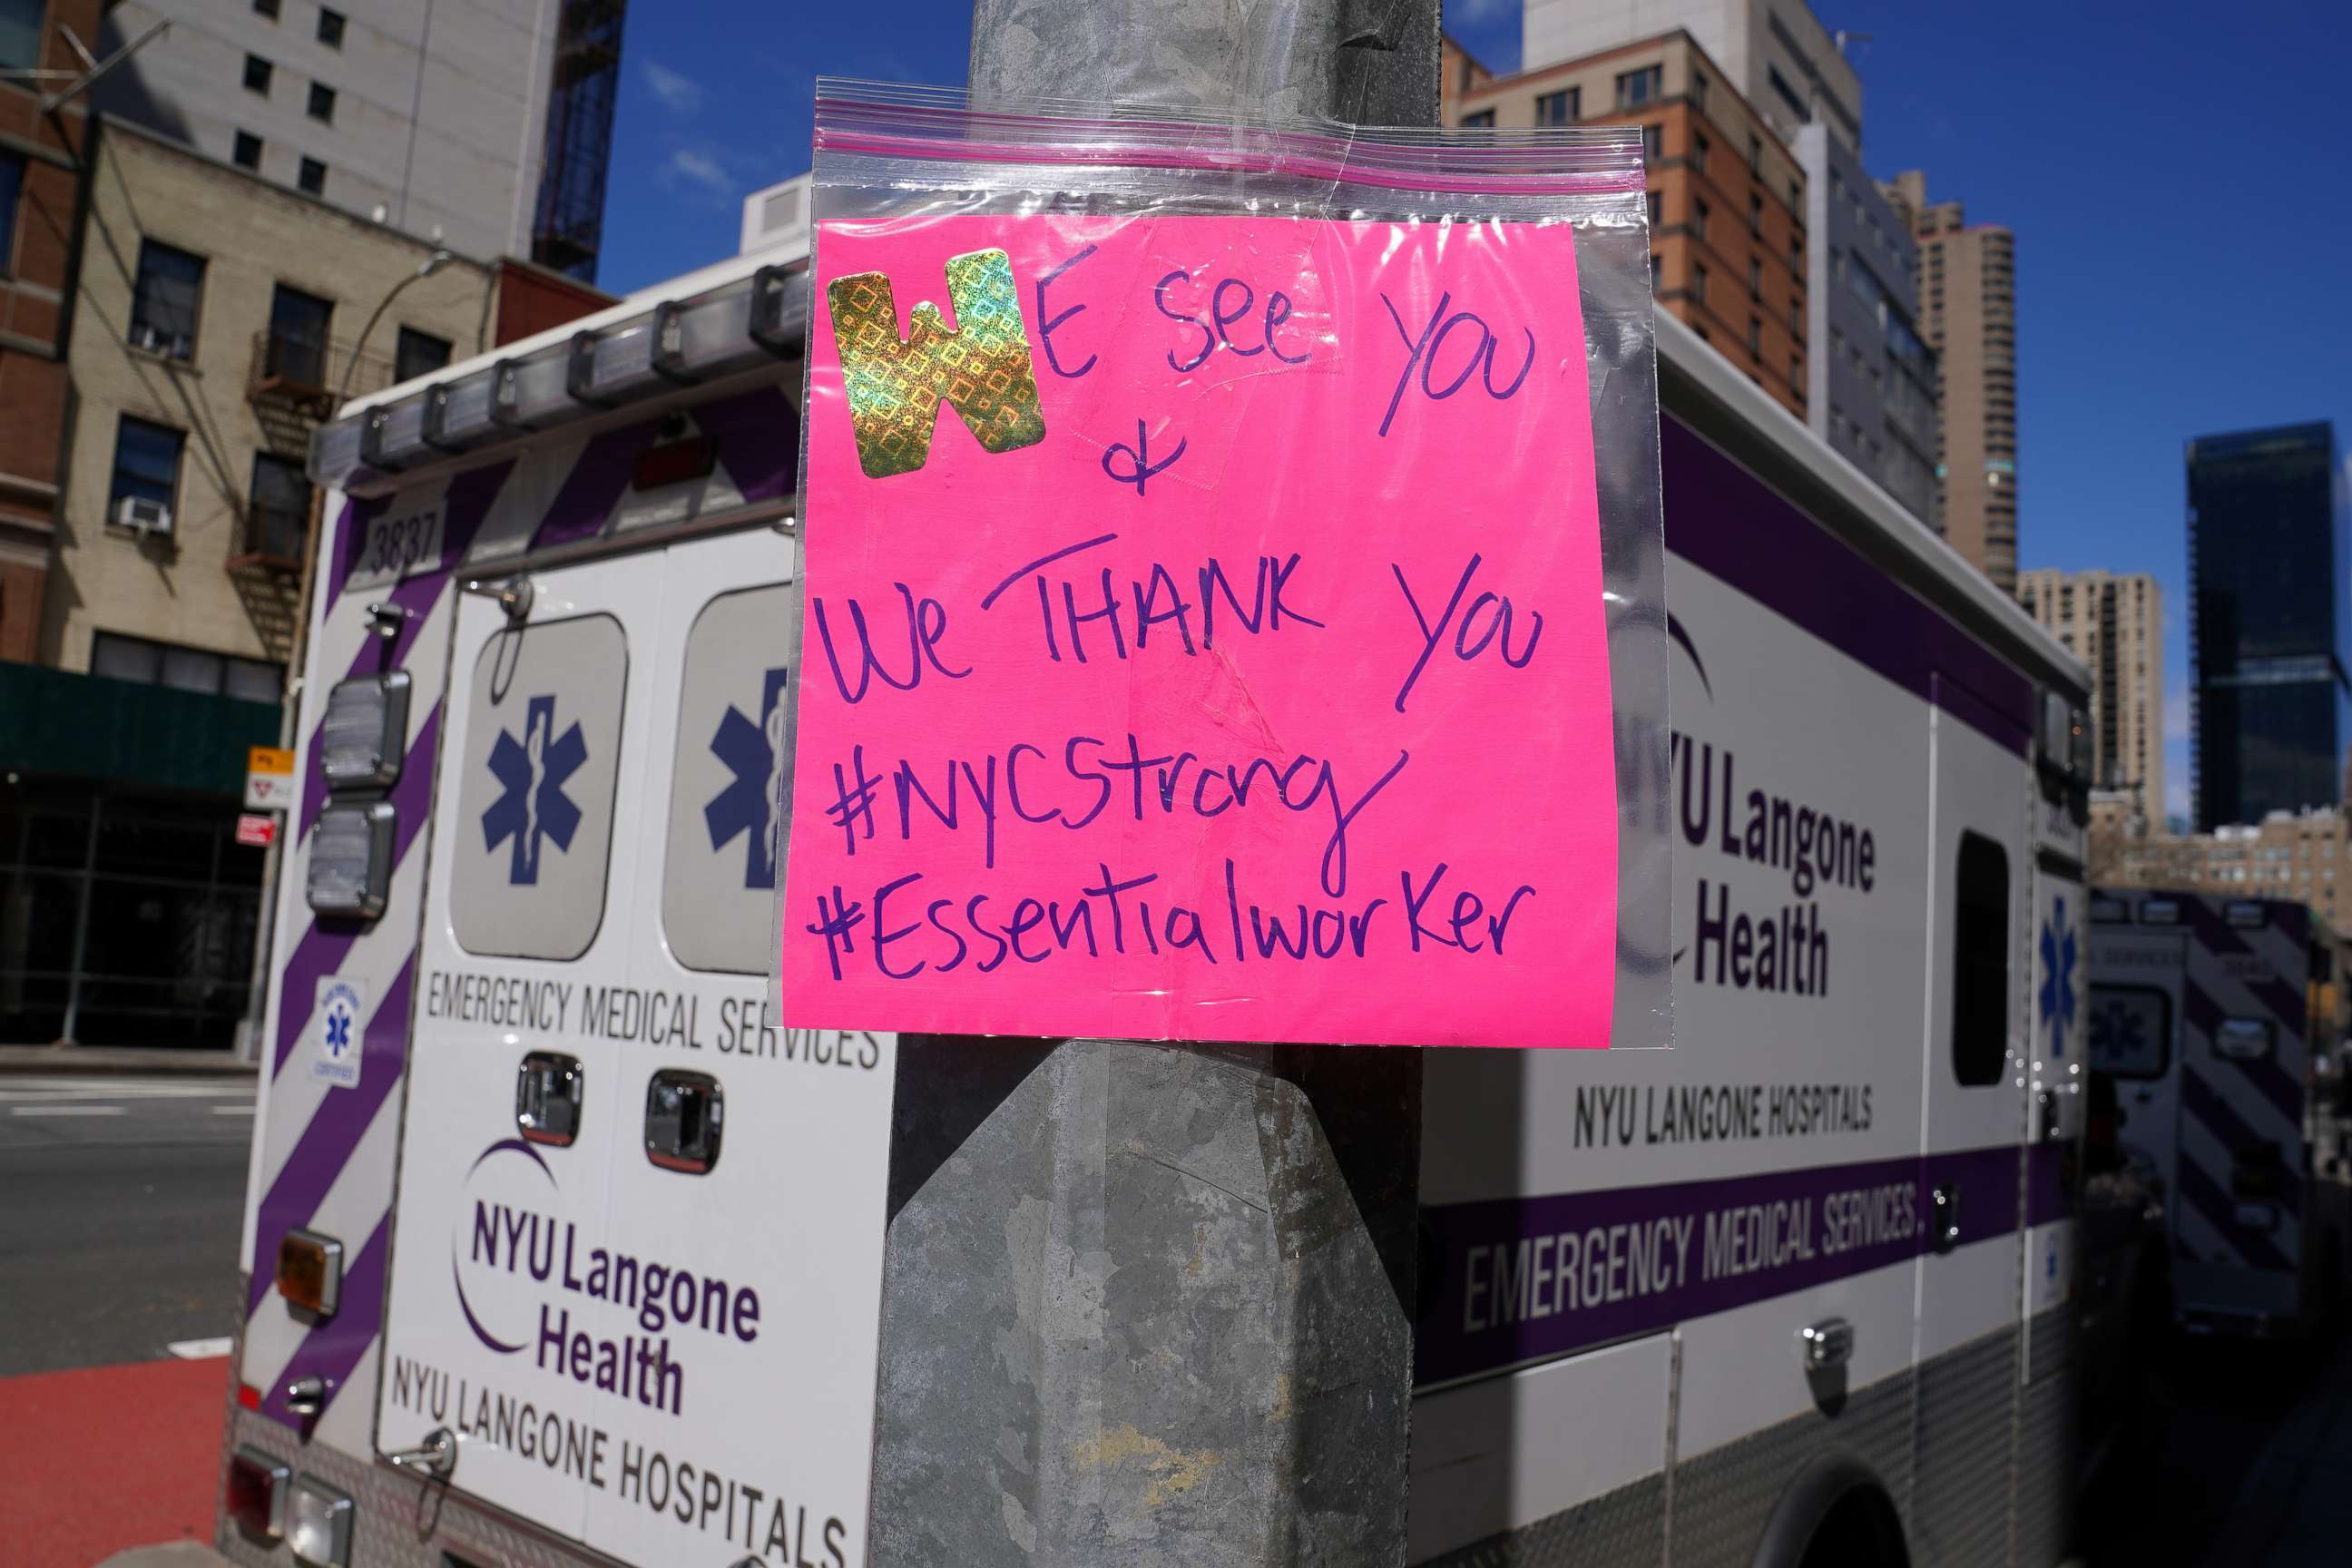 PHOTO: A sign of support is hung outside a hospital during the outbreak of coronavirus (COVID-19), in the Manhattan borough of New York City, April 2, 2020.